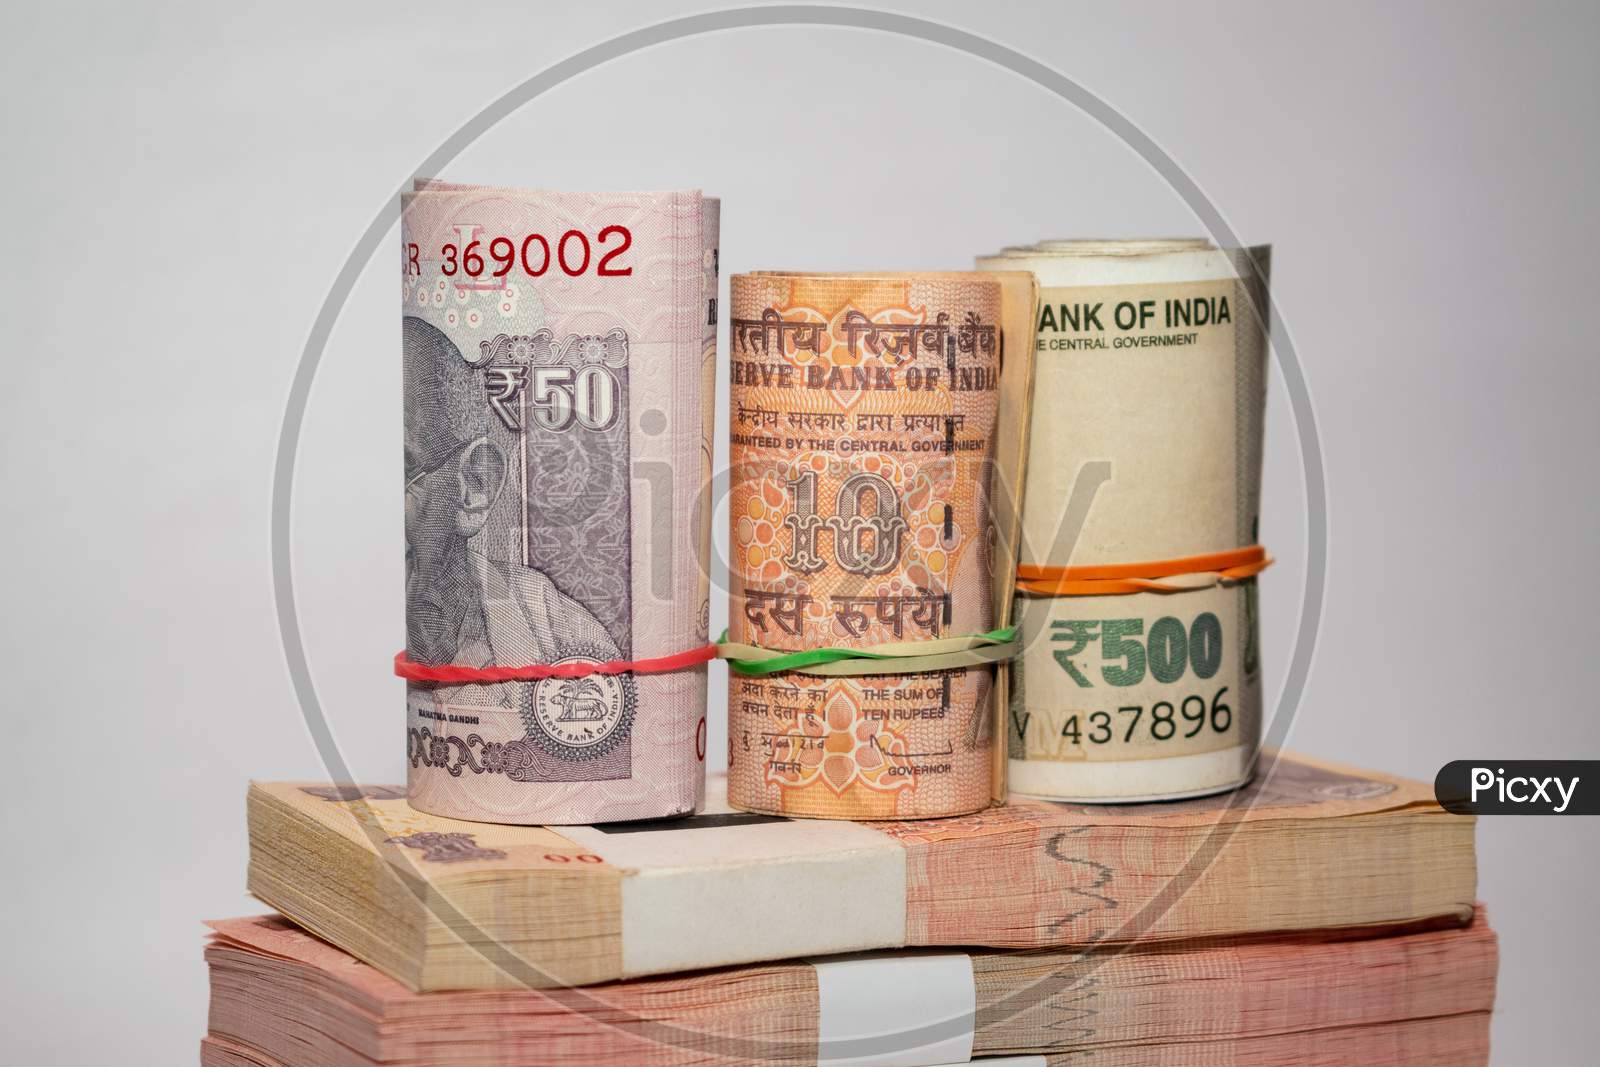 Rolls and bundles of Indian currency notes placed on a white background